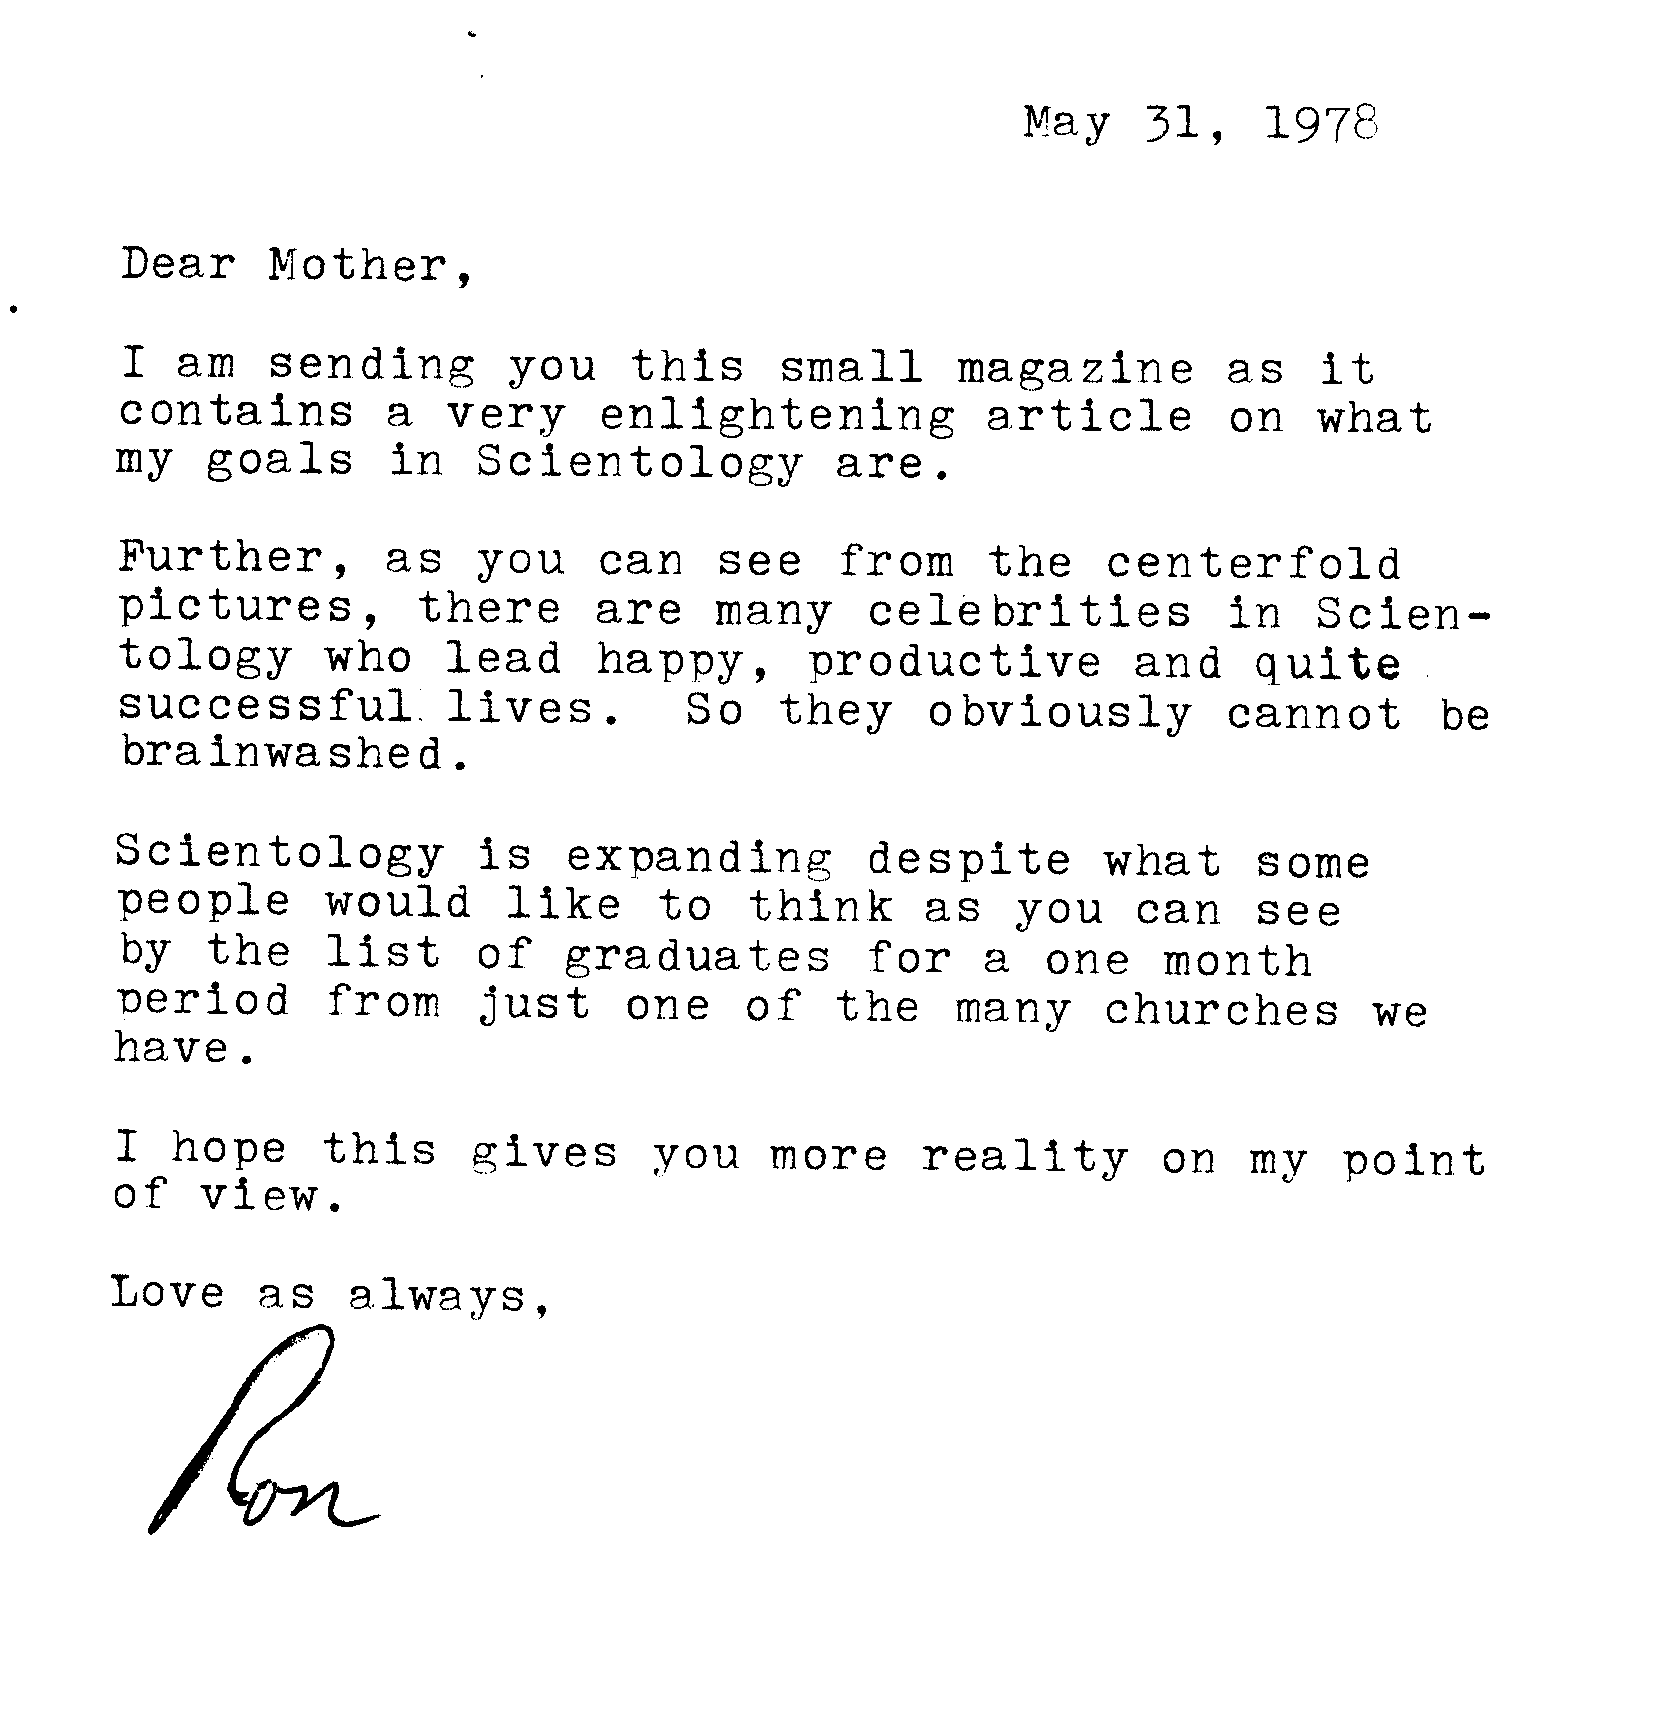 short letter from Ronnie to his mom